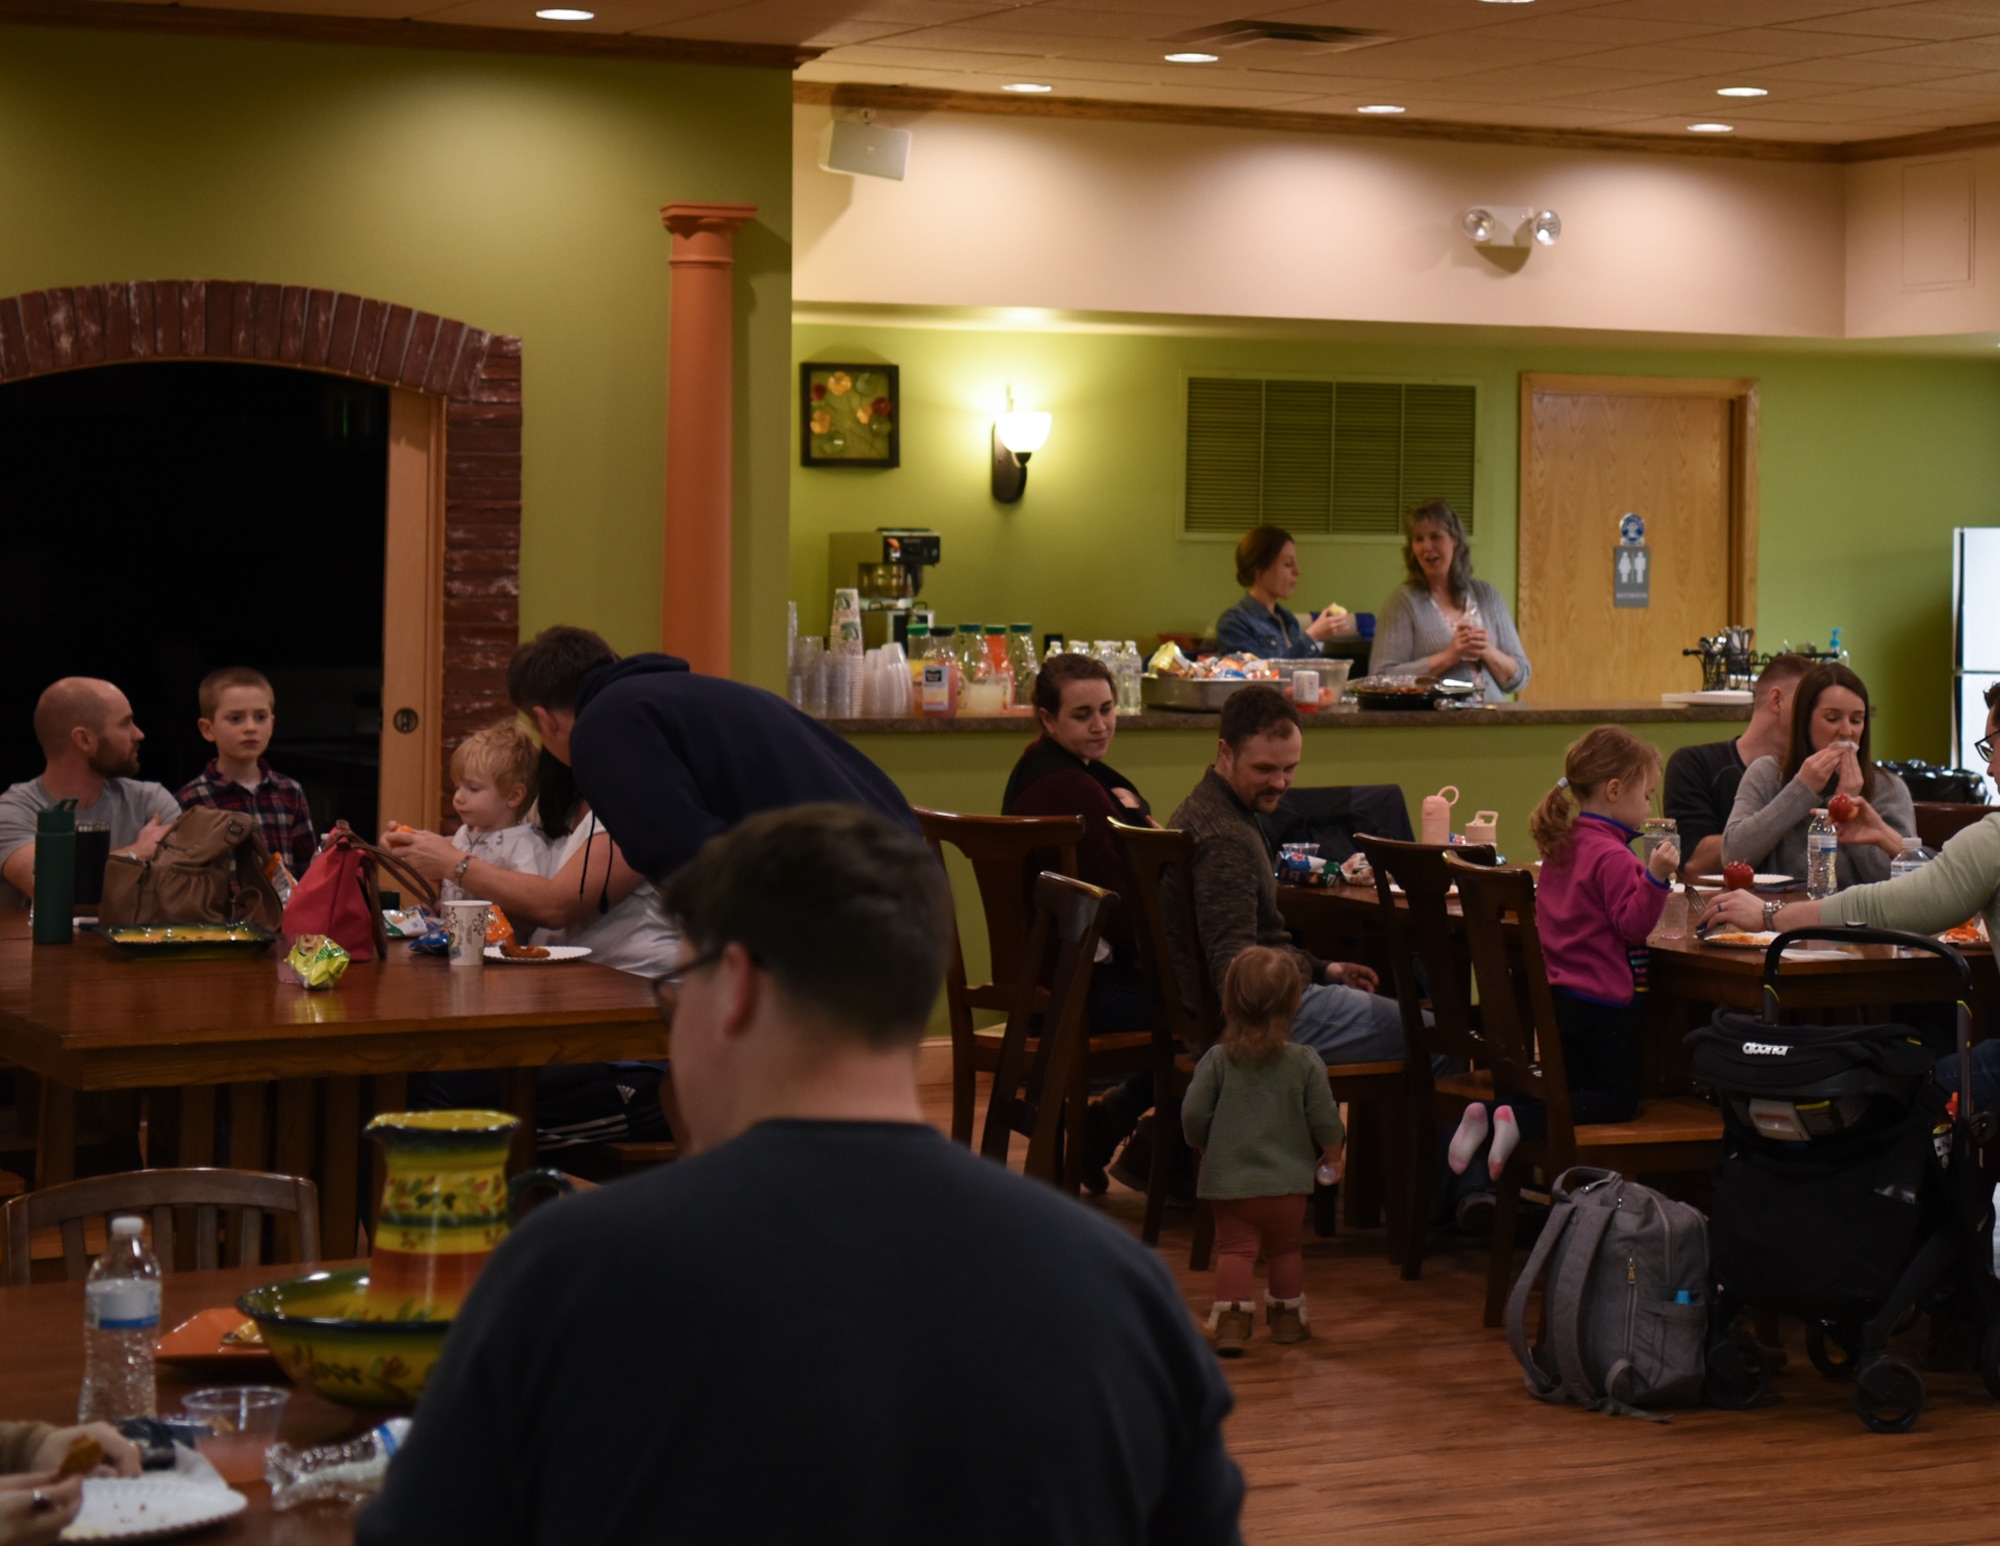 Families dine and participate in fellowship